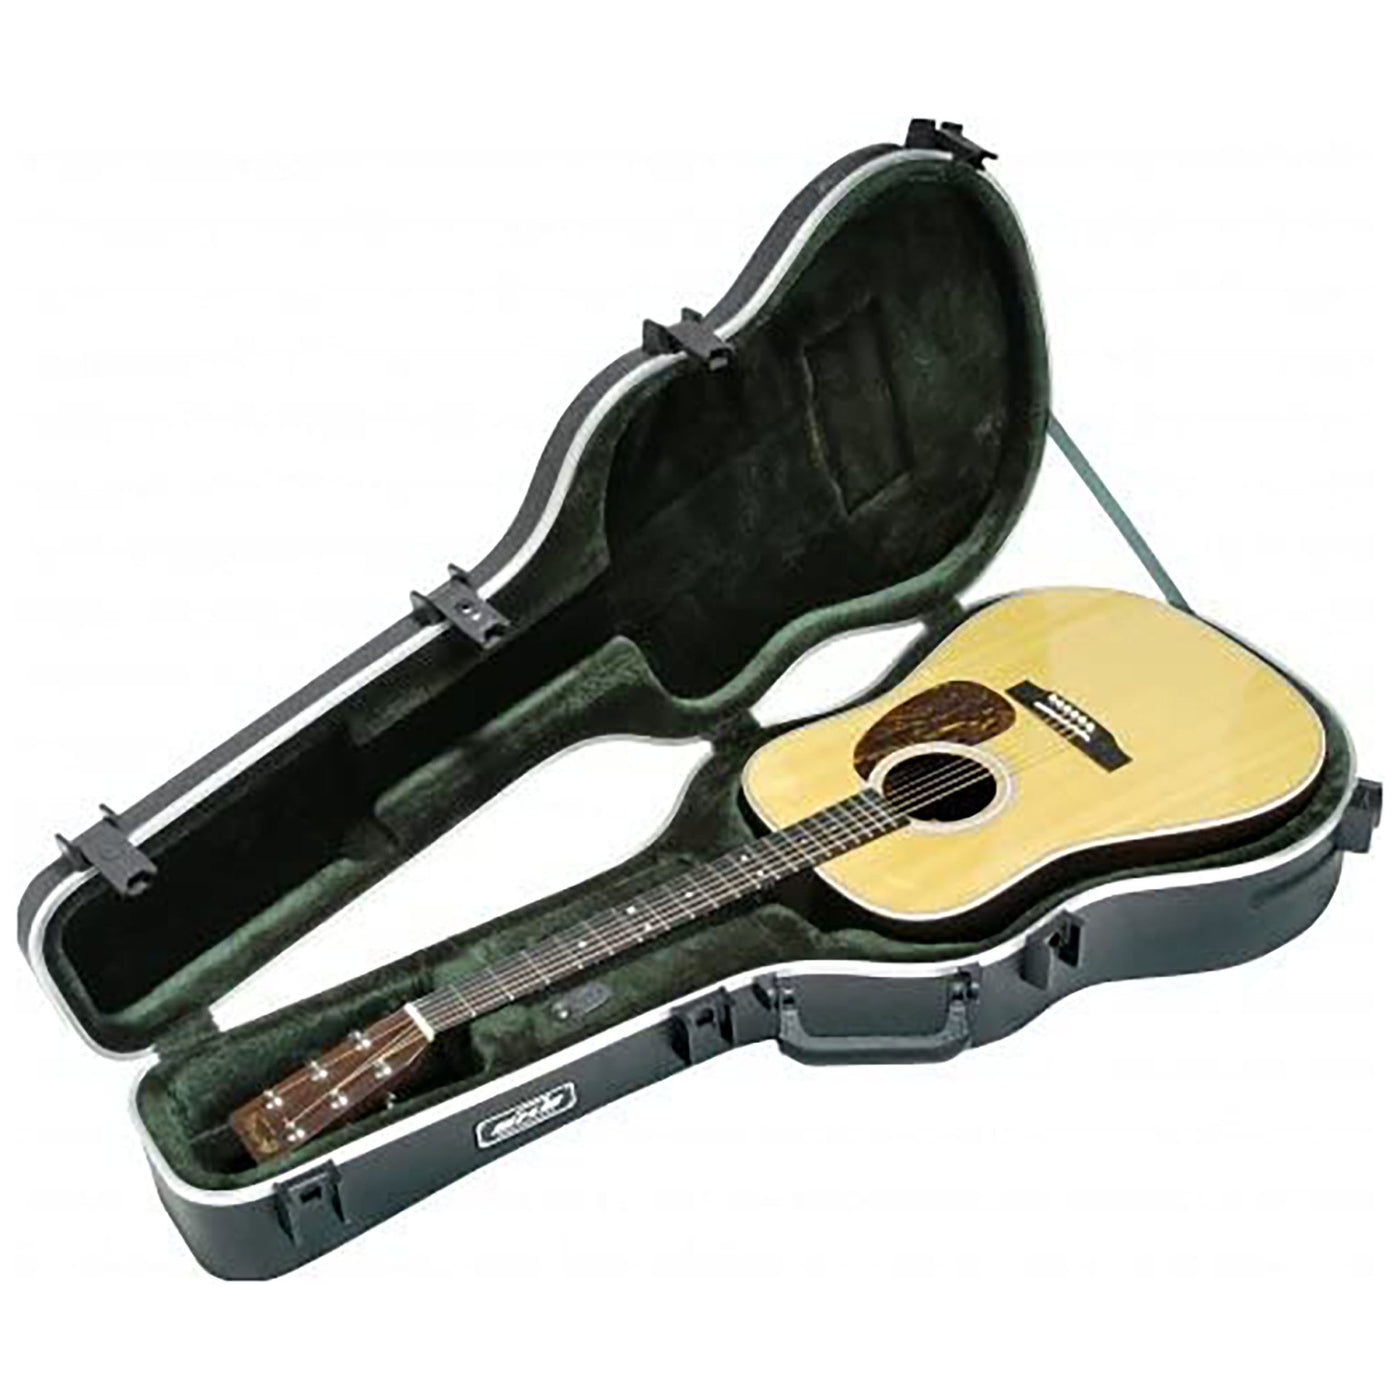 SKB Cases 1SKB-18 Roto-Molded Deluxe Guitar Case for Acoustic Dreadnoughts and 12-String Guitars, TSA Latch and Over-Molded Handle